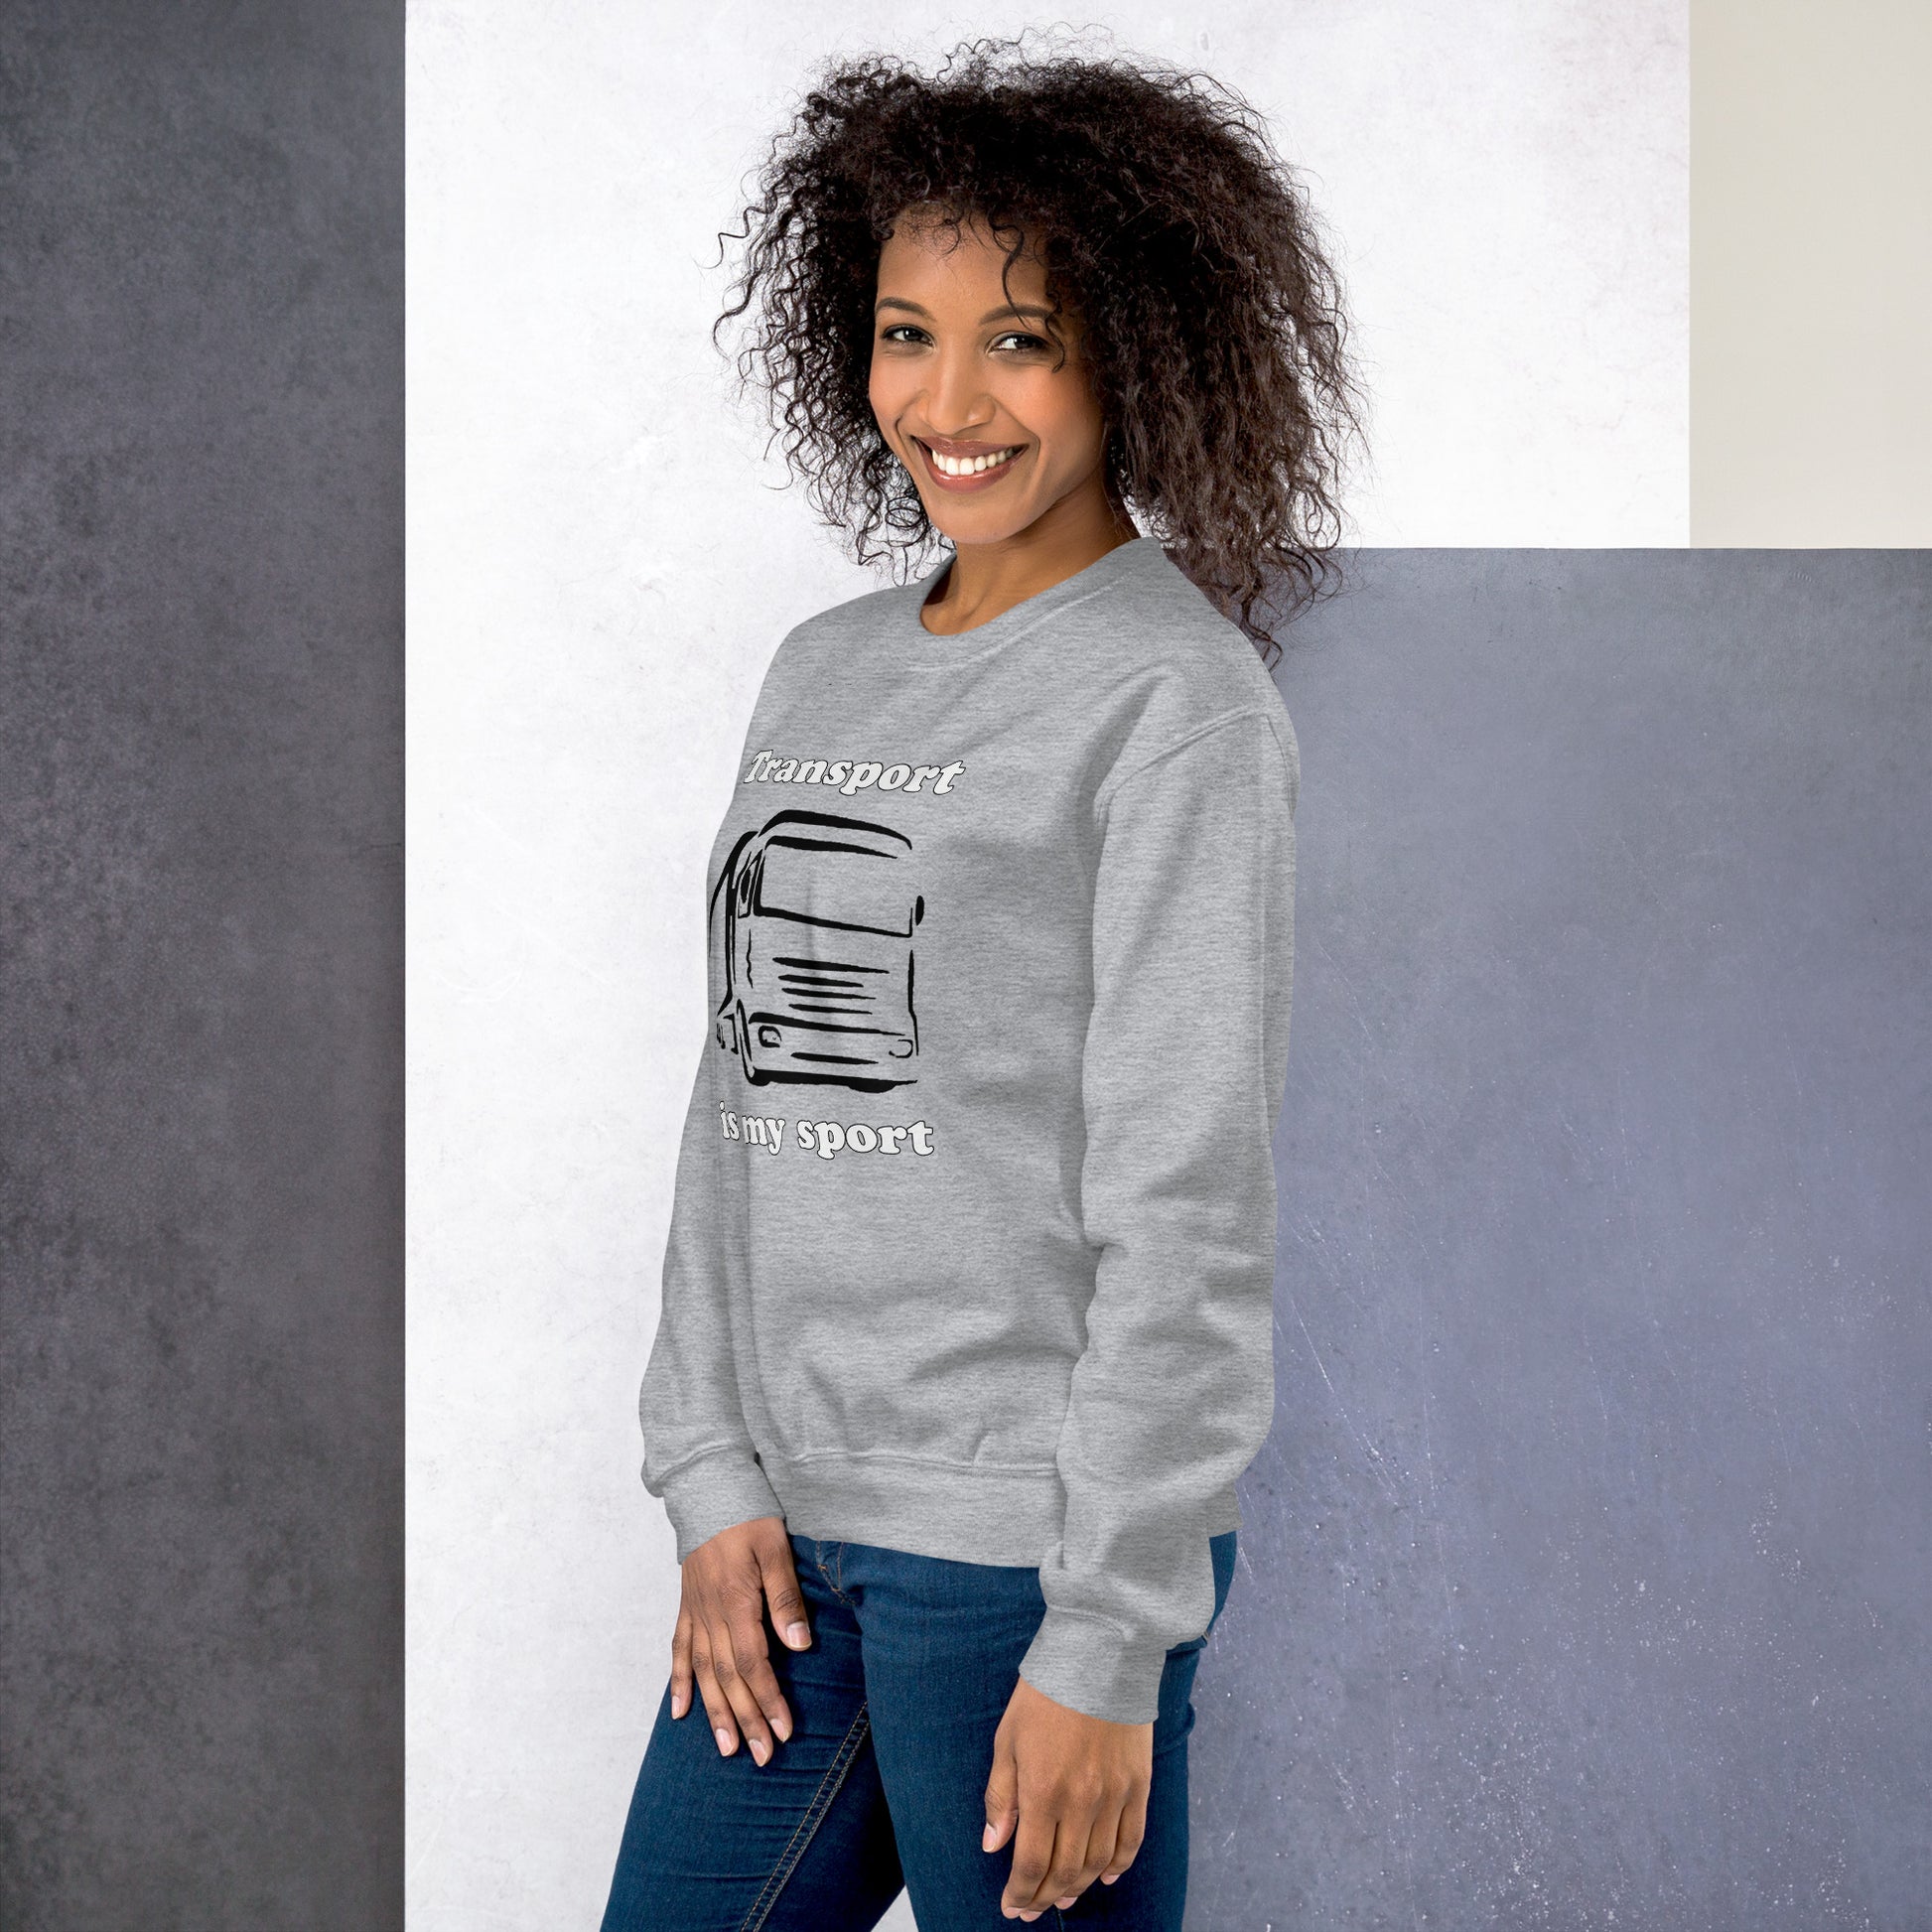 Woman with grey sweatshirt with picture of truck and text "Transport is my sport"